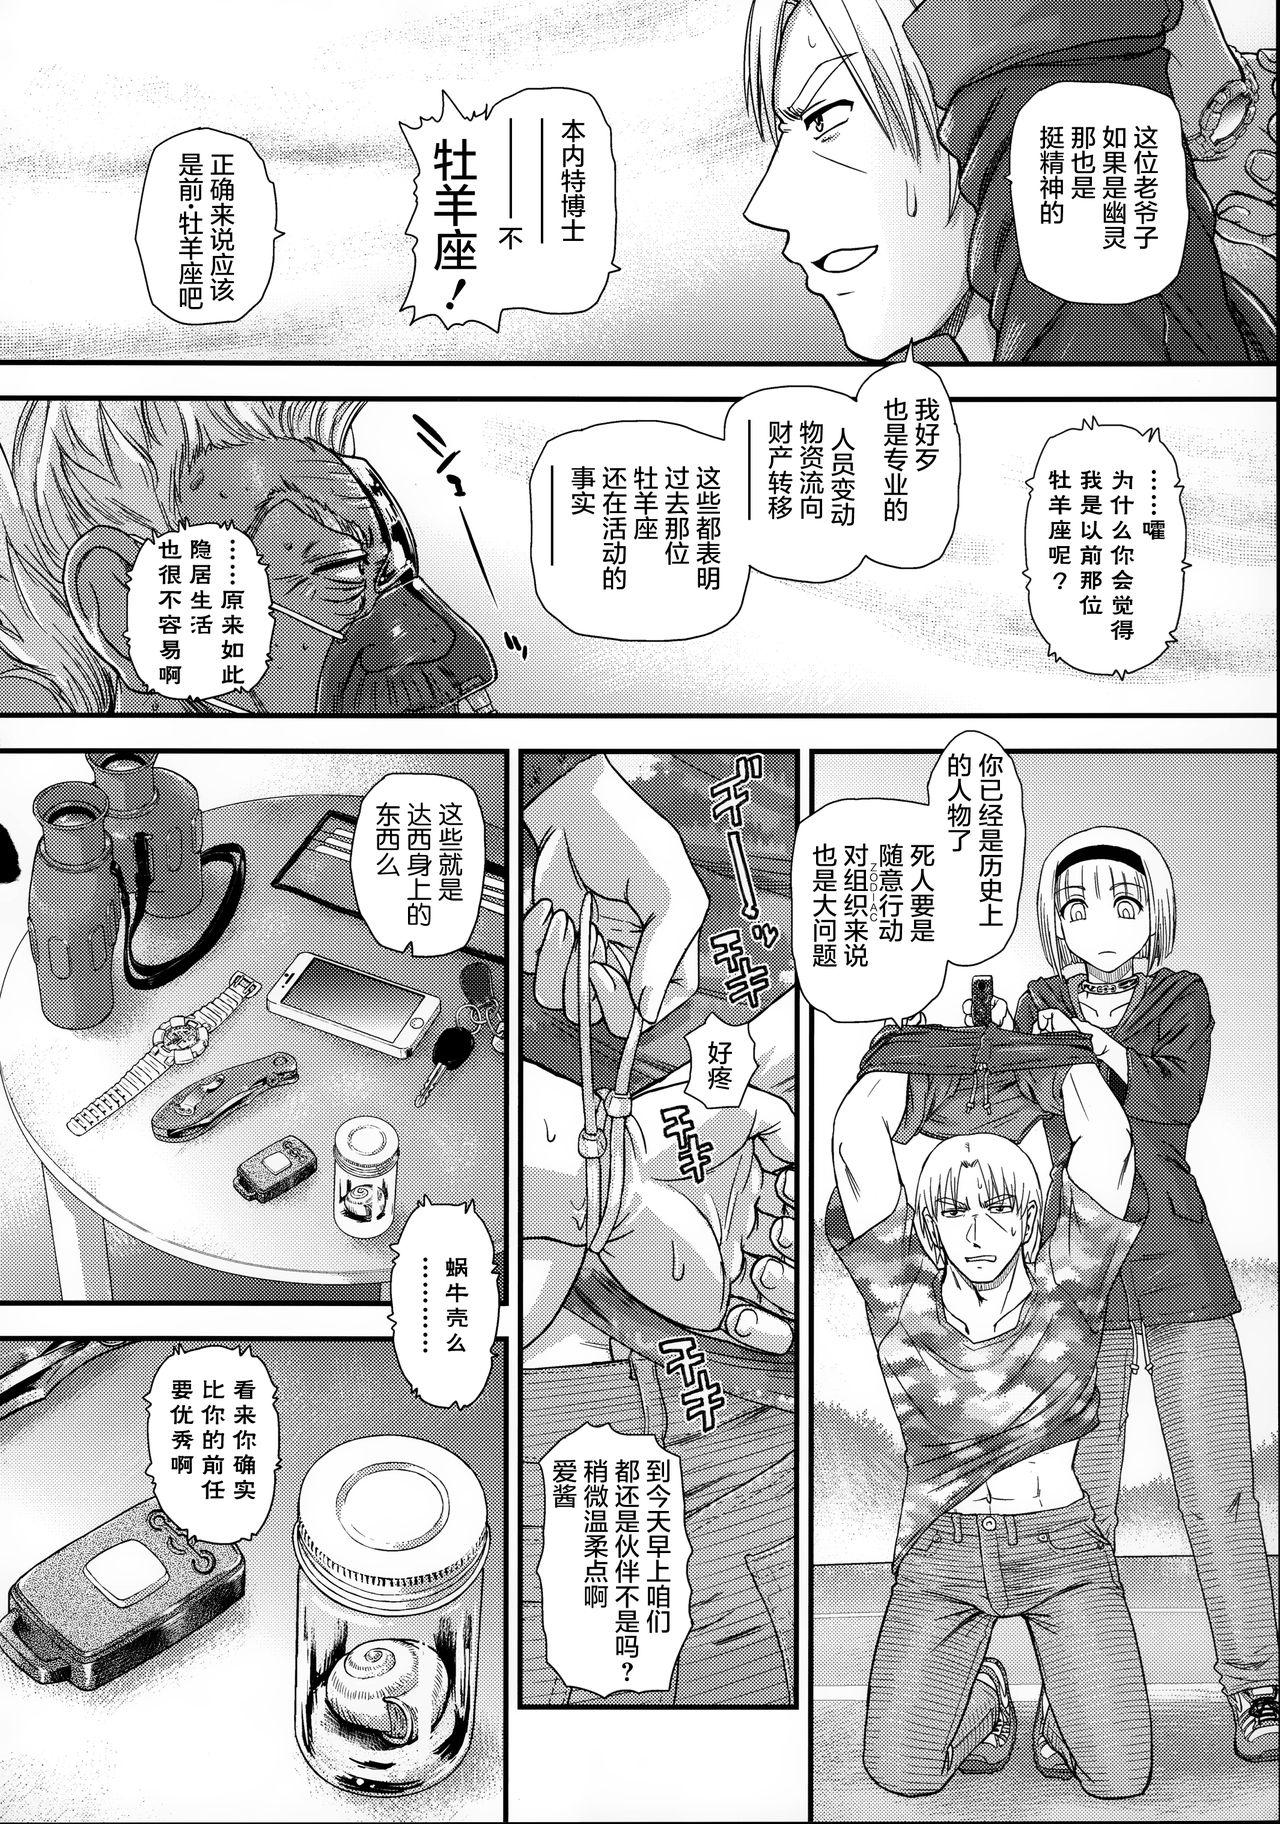 Girlongirl (C95) [Behind Moon (Dulce-Q)] DR:II ep.7 ~Dulce Report~ | 达西报告II Ep.7 [Chinese] [鬼畜王汉化组] - Original Class Room - Page 10